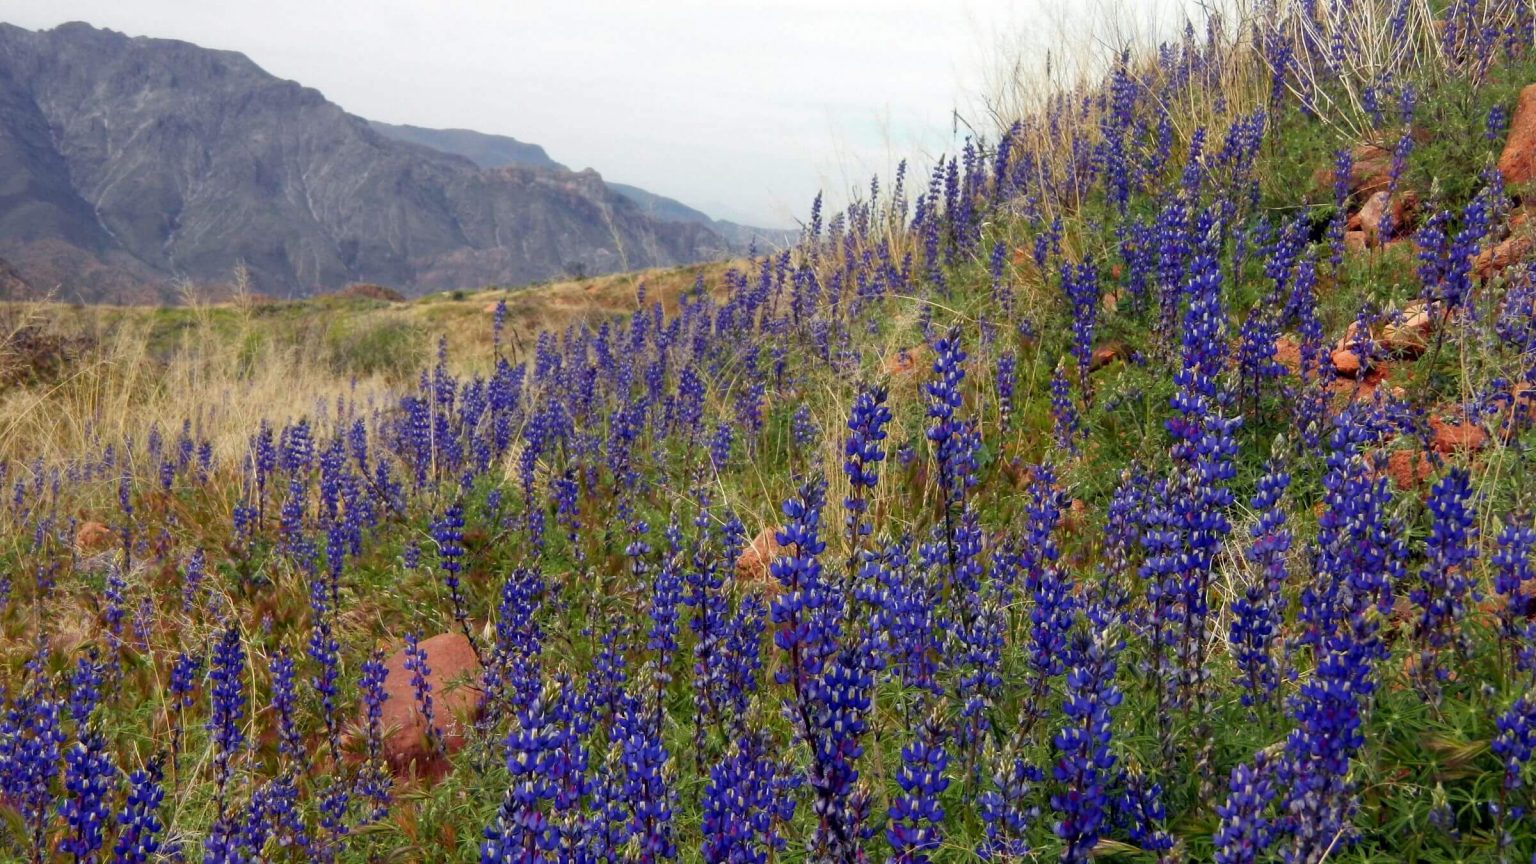 Superstition Wilderness, backpacking, lupine species, March